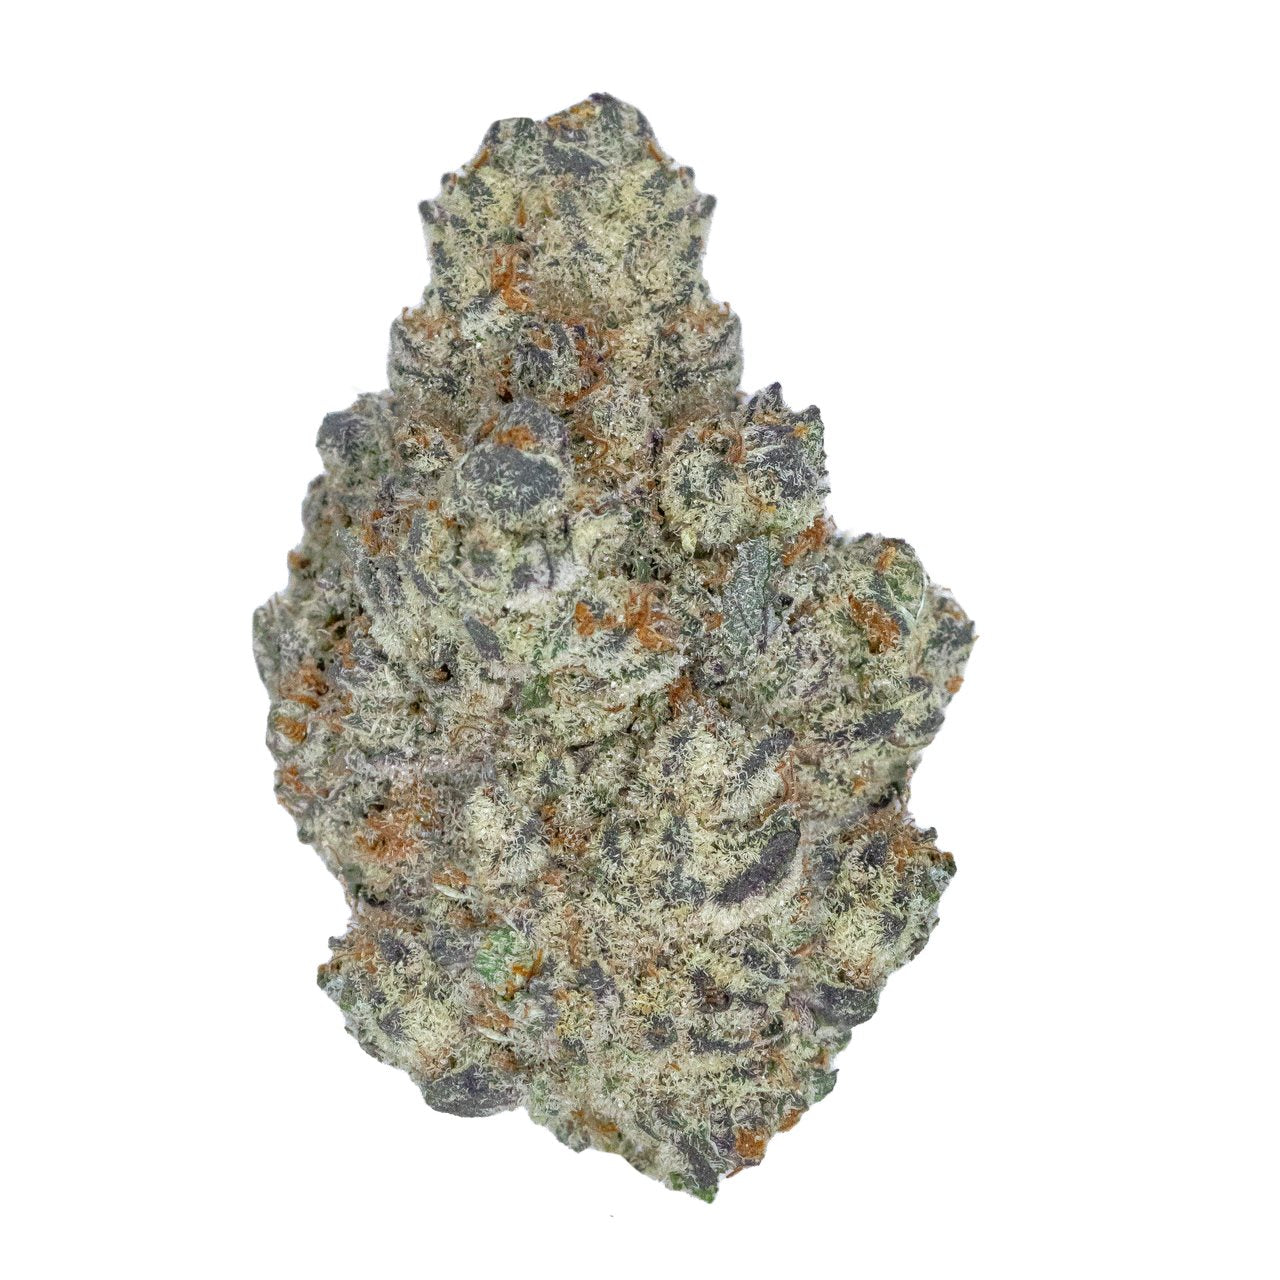 A nug of cannabis flower from the White Durban weed strain sits against a white background.